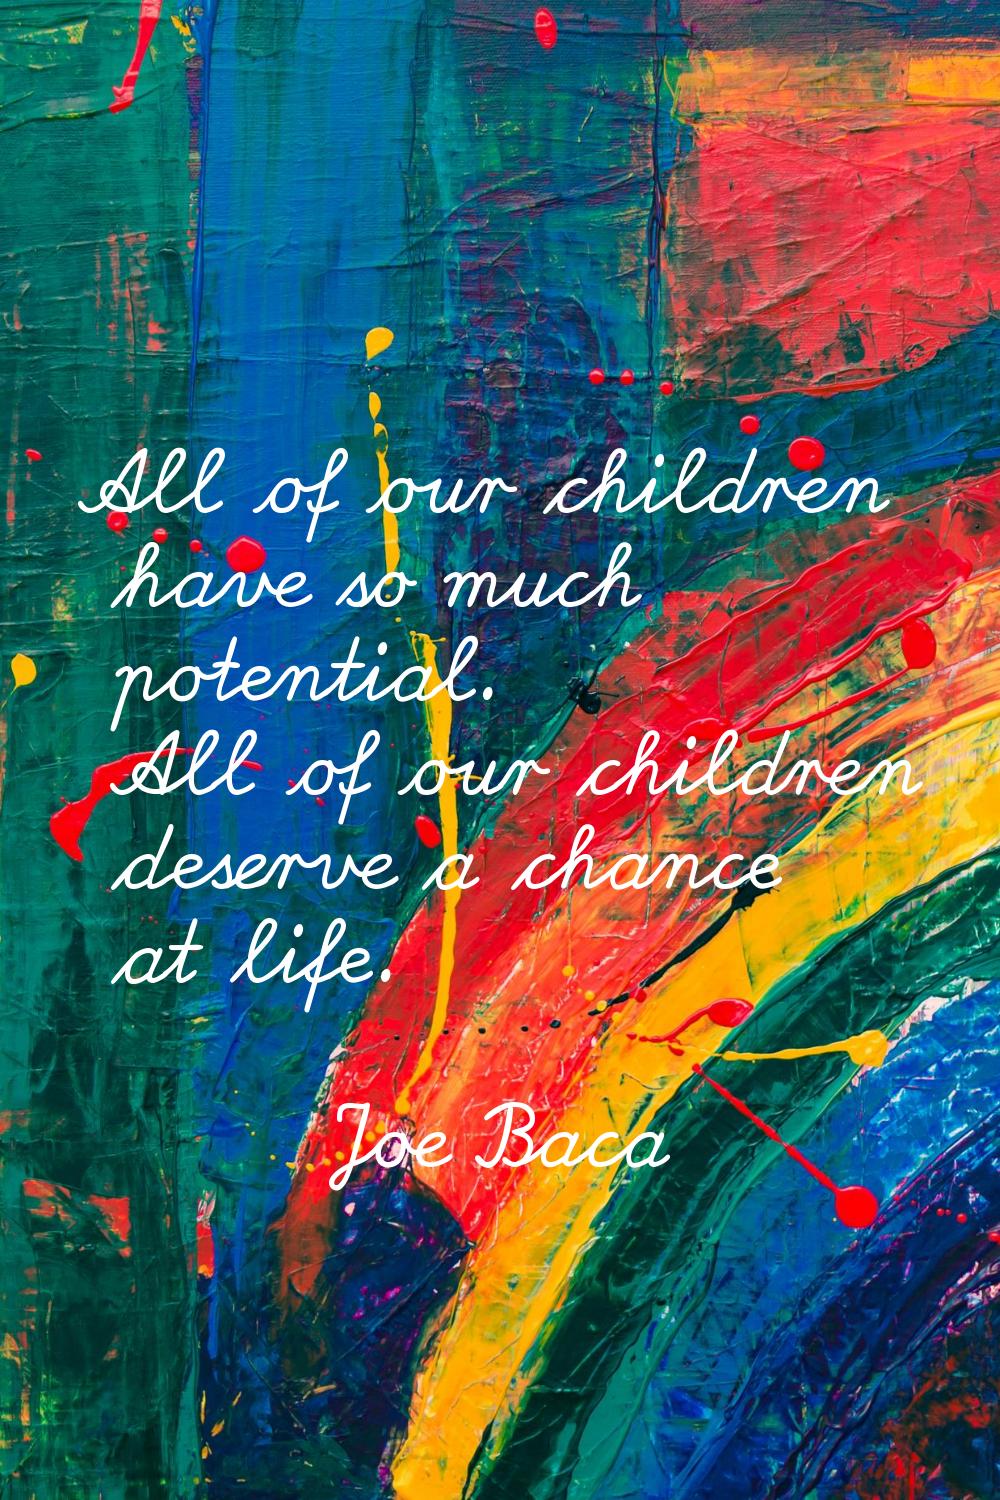 All of our children have so much potential. All of our children deserve a chance at life.